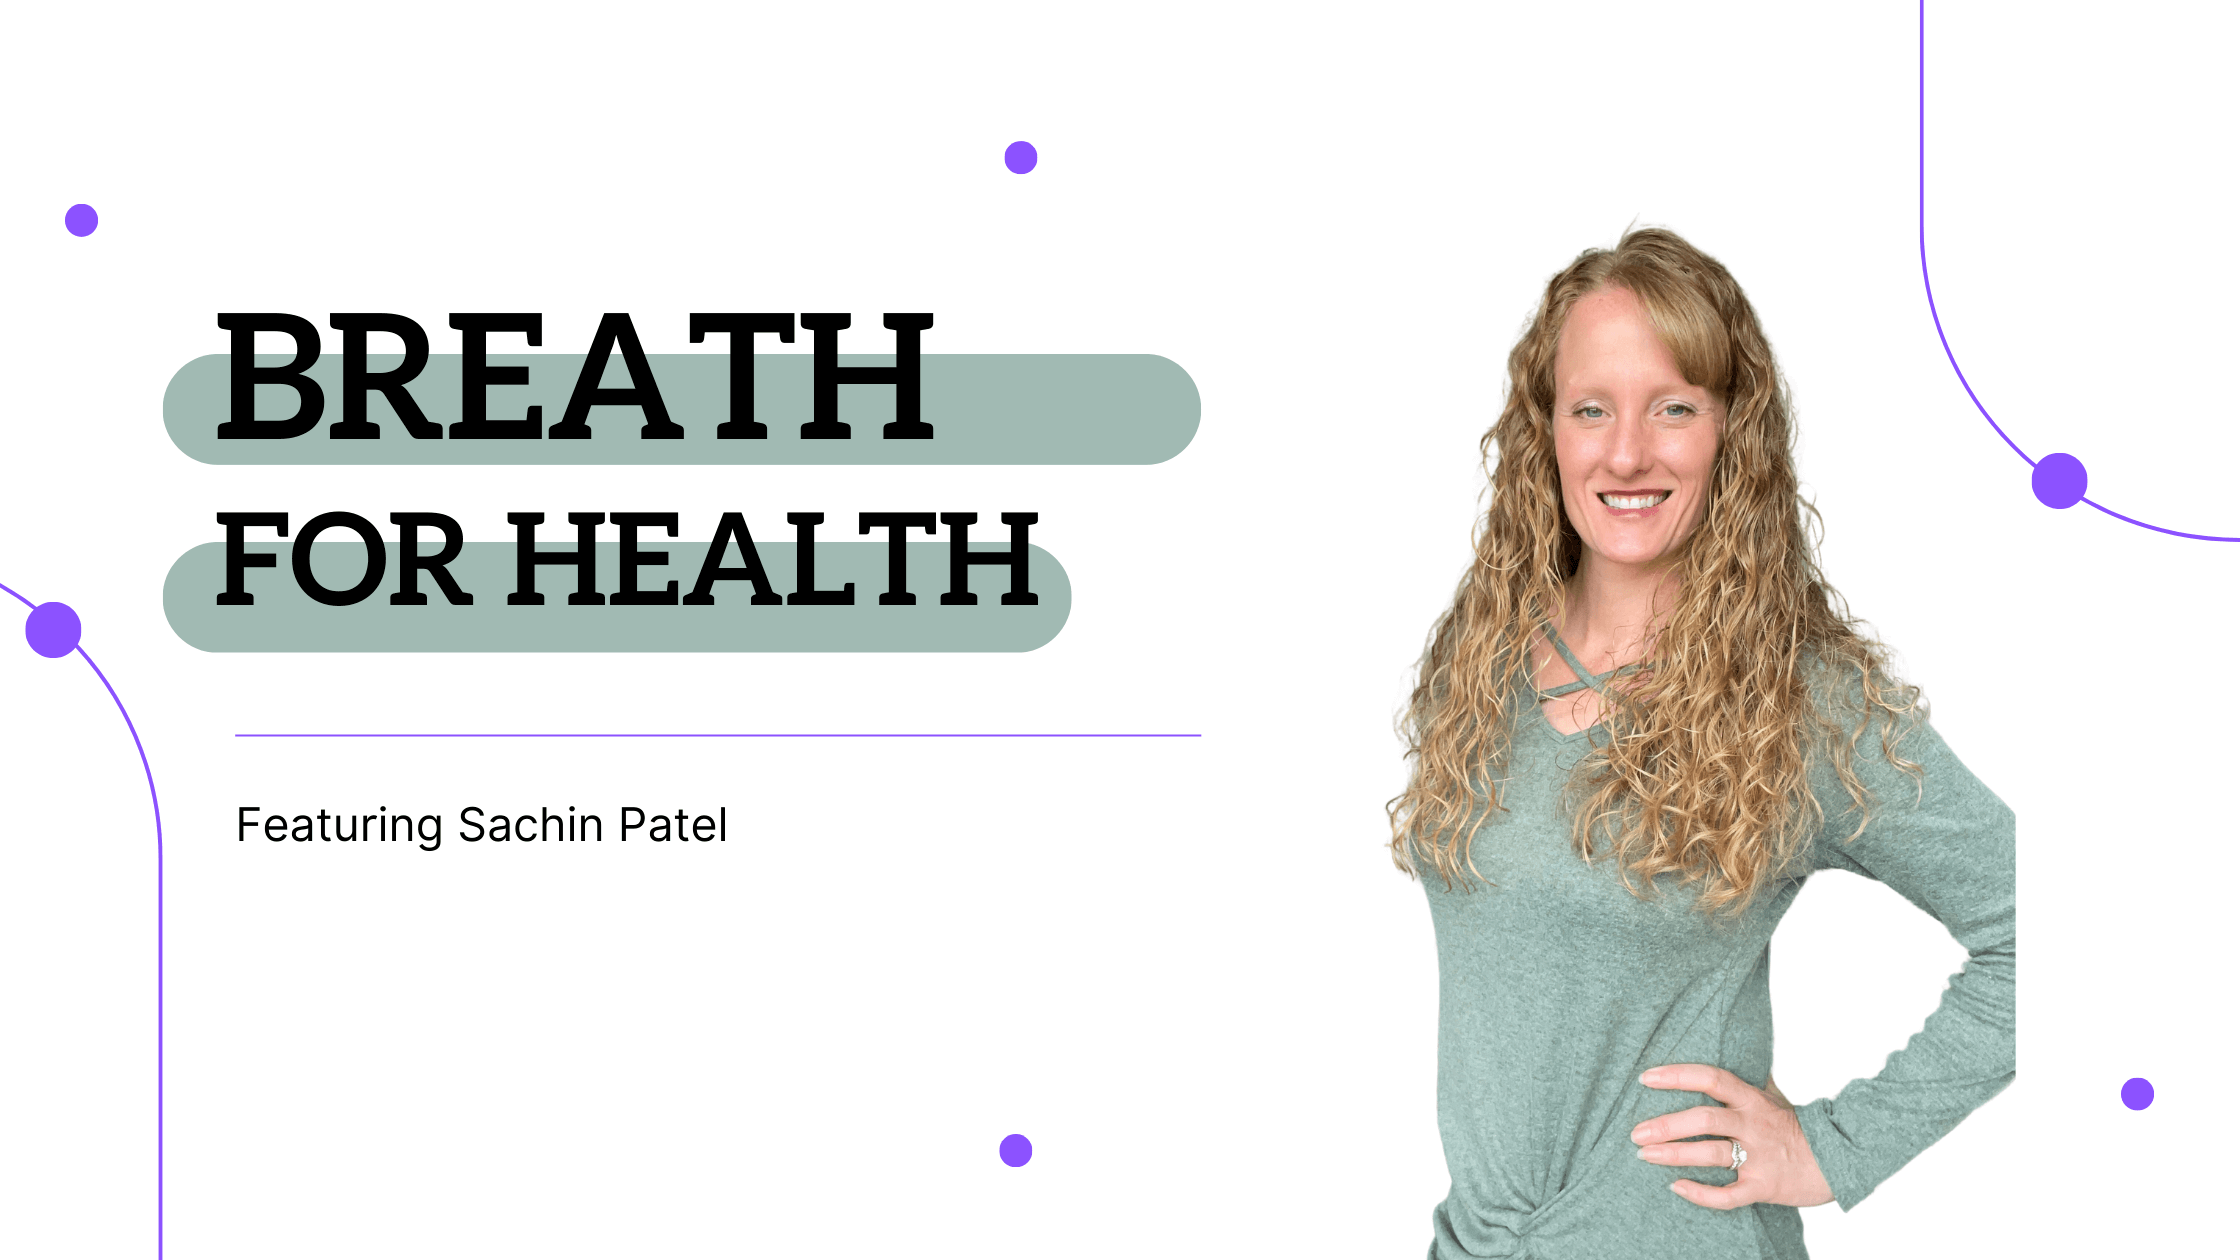 Holistic Health Bites podcast with Functional Nutritionist Andrea Nicholson, featuring Sachin Patel discussing the power of breathing on ideal health